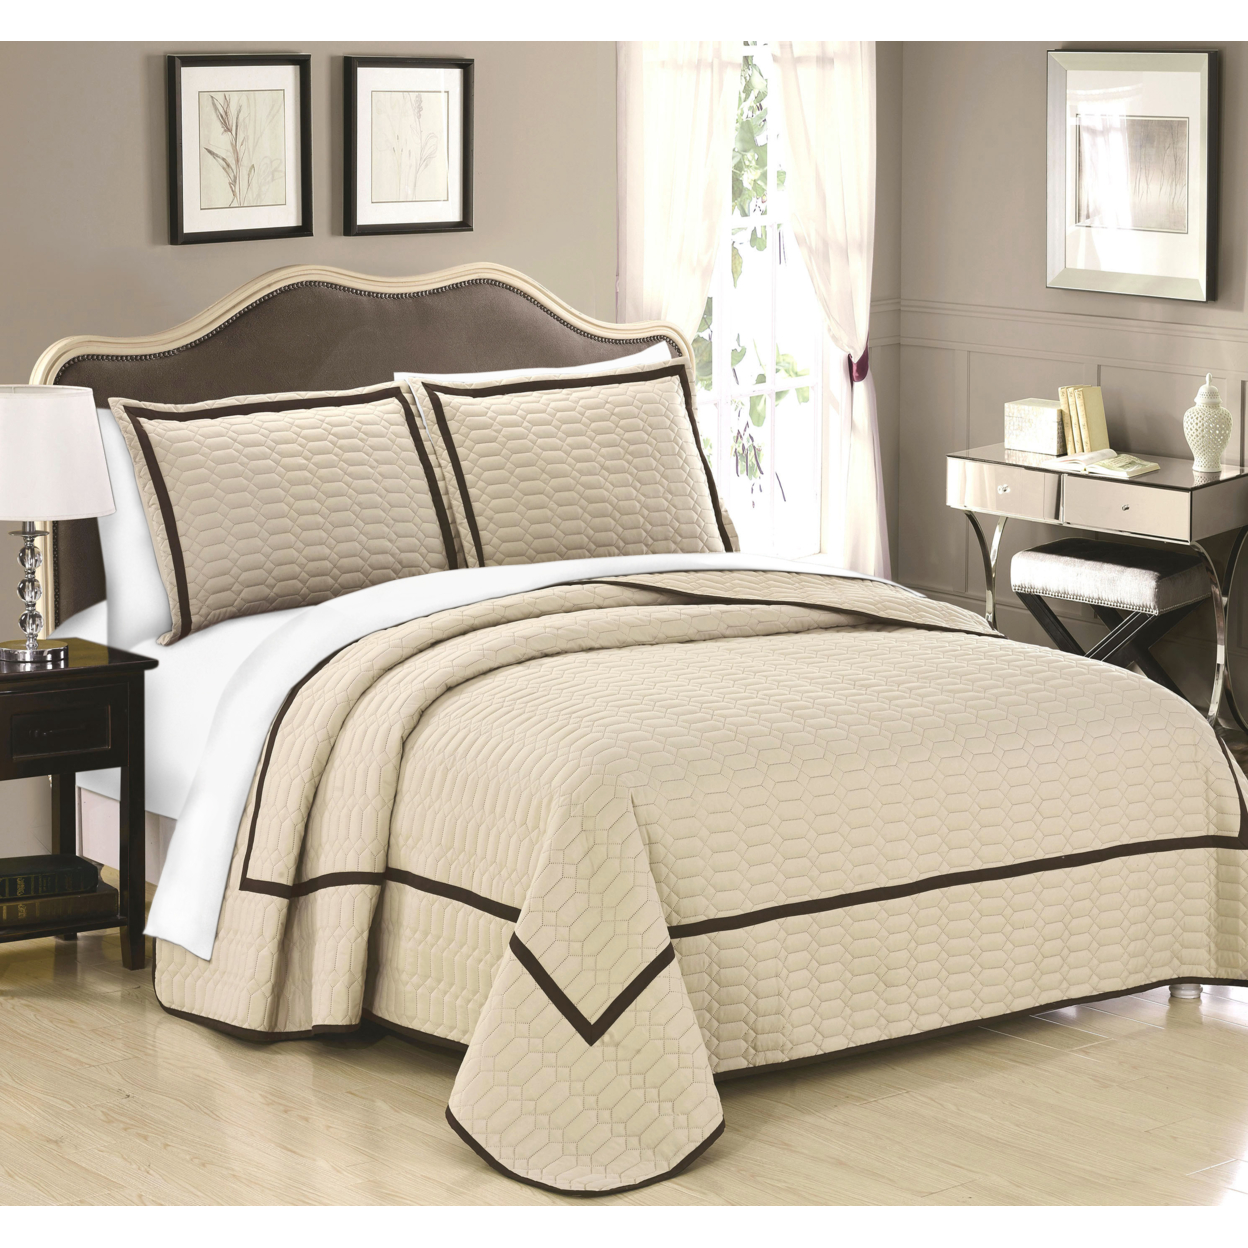 3 Or 2 Piece Halrowe Hotel Collection 2 Tone Banded Quilted Geometrical Embroidered Quilt Set - Beige, Queen